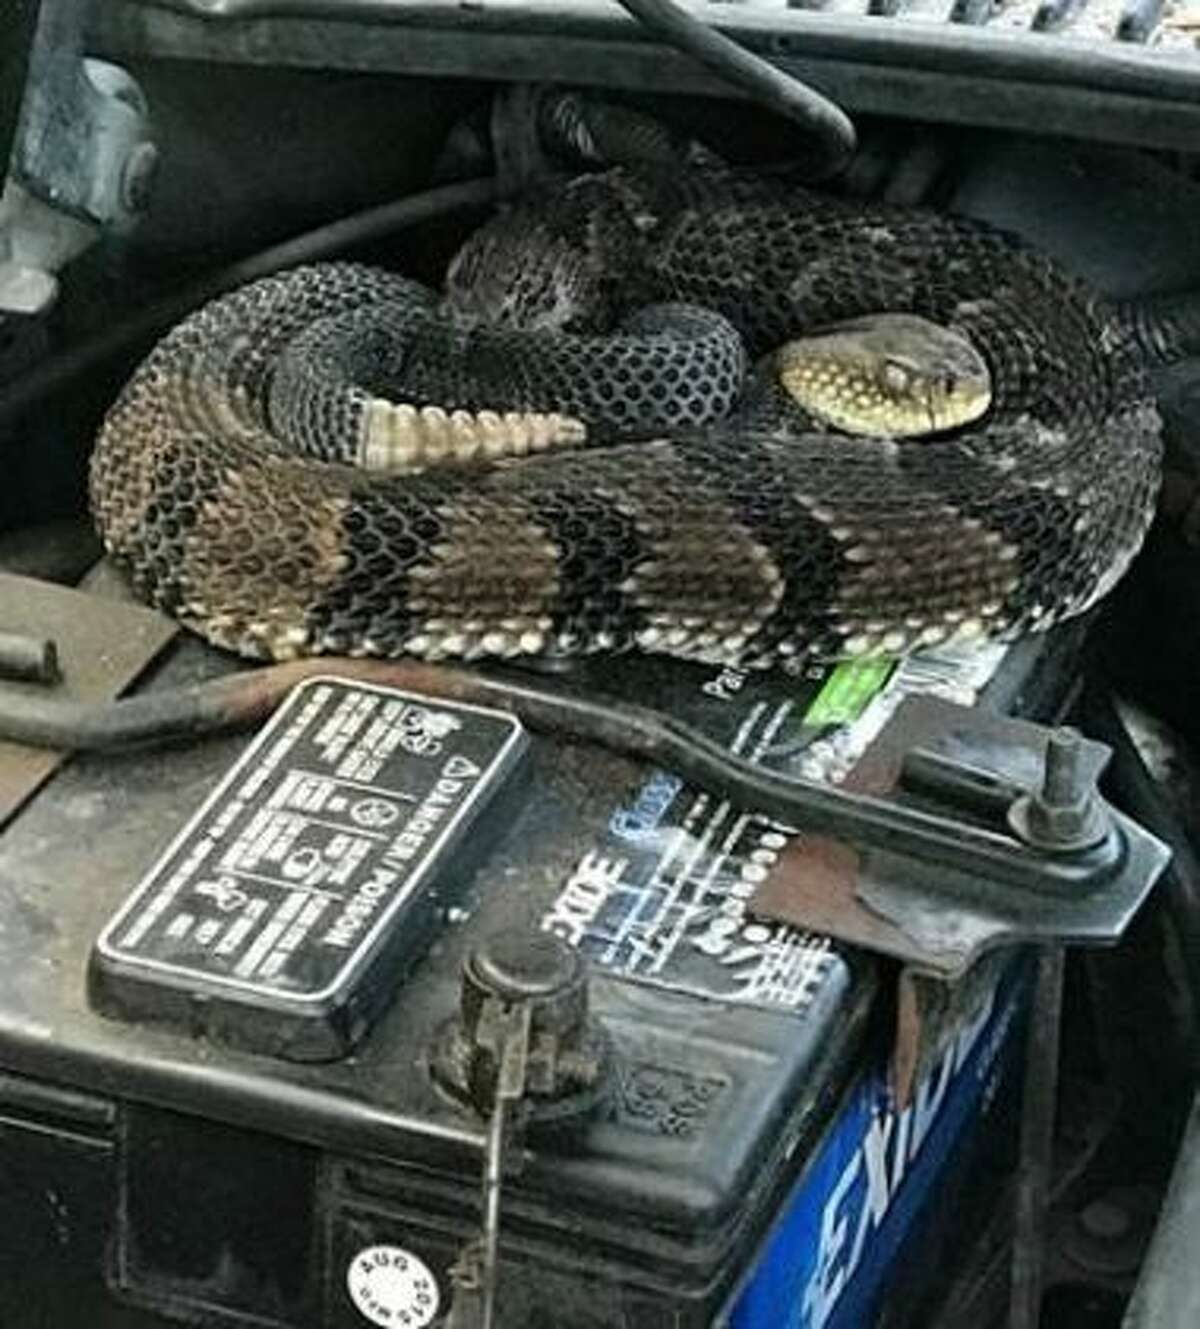 A timber rattlesnake sought shelter inside a car's engine compartment on June 11, 2018, in Hancock, Delaware County, N.Y.